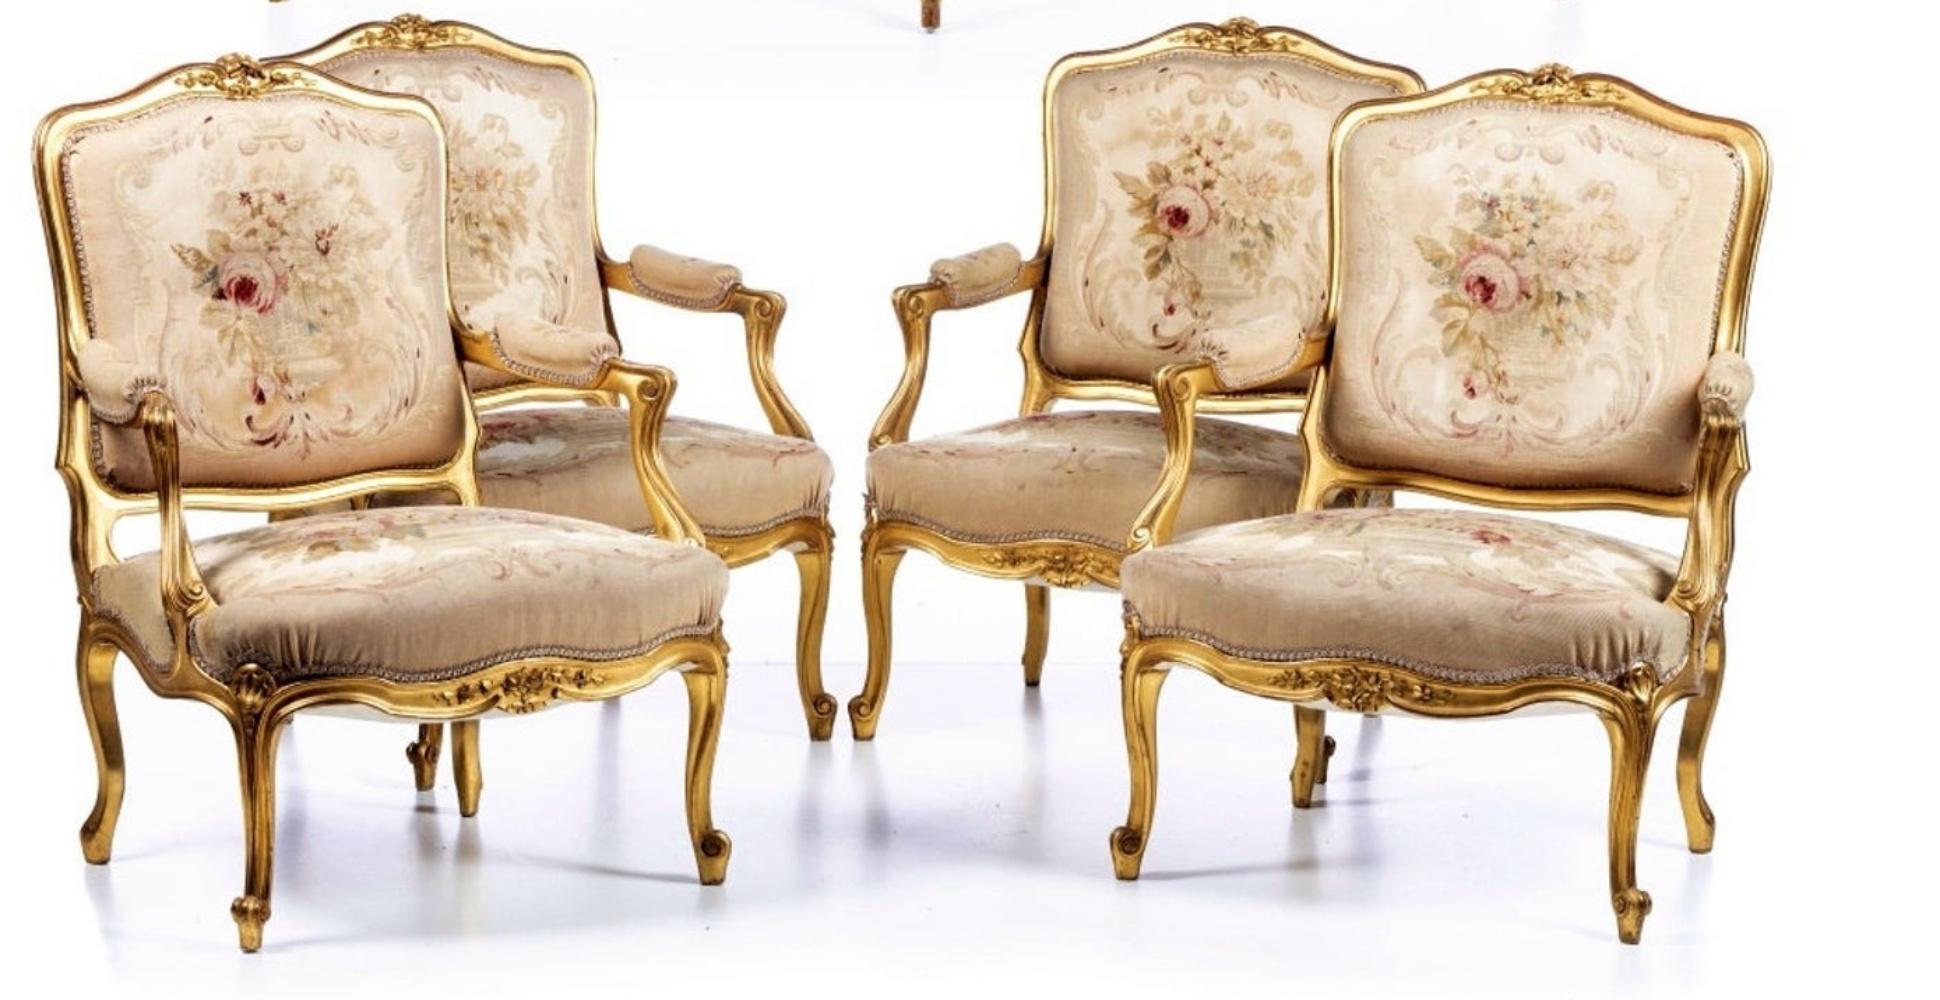 Rococo Four Louis XV Armchairs and Sofa 19th Century Aubusson Tapestry